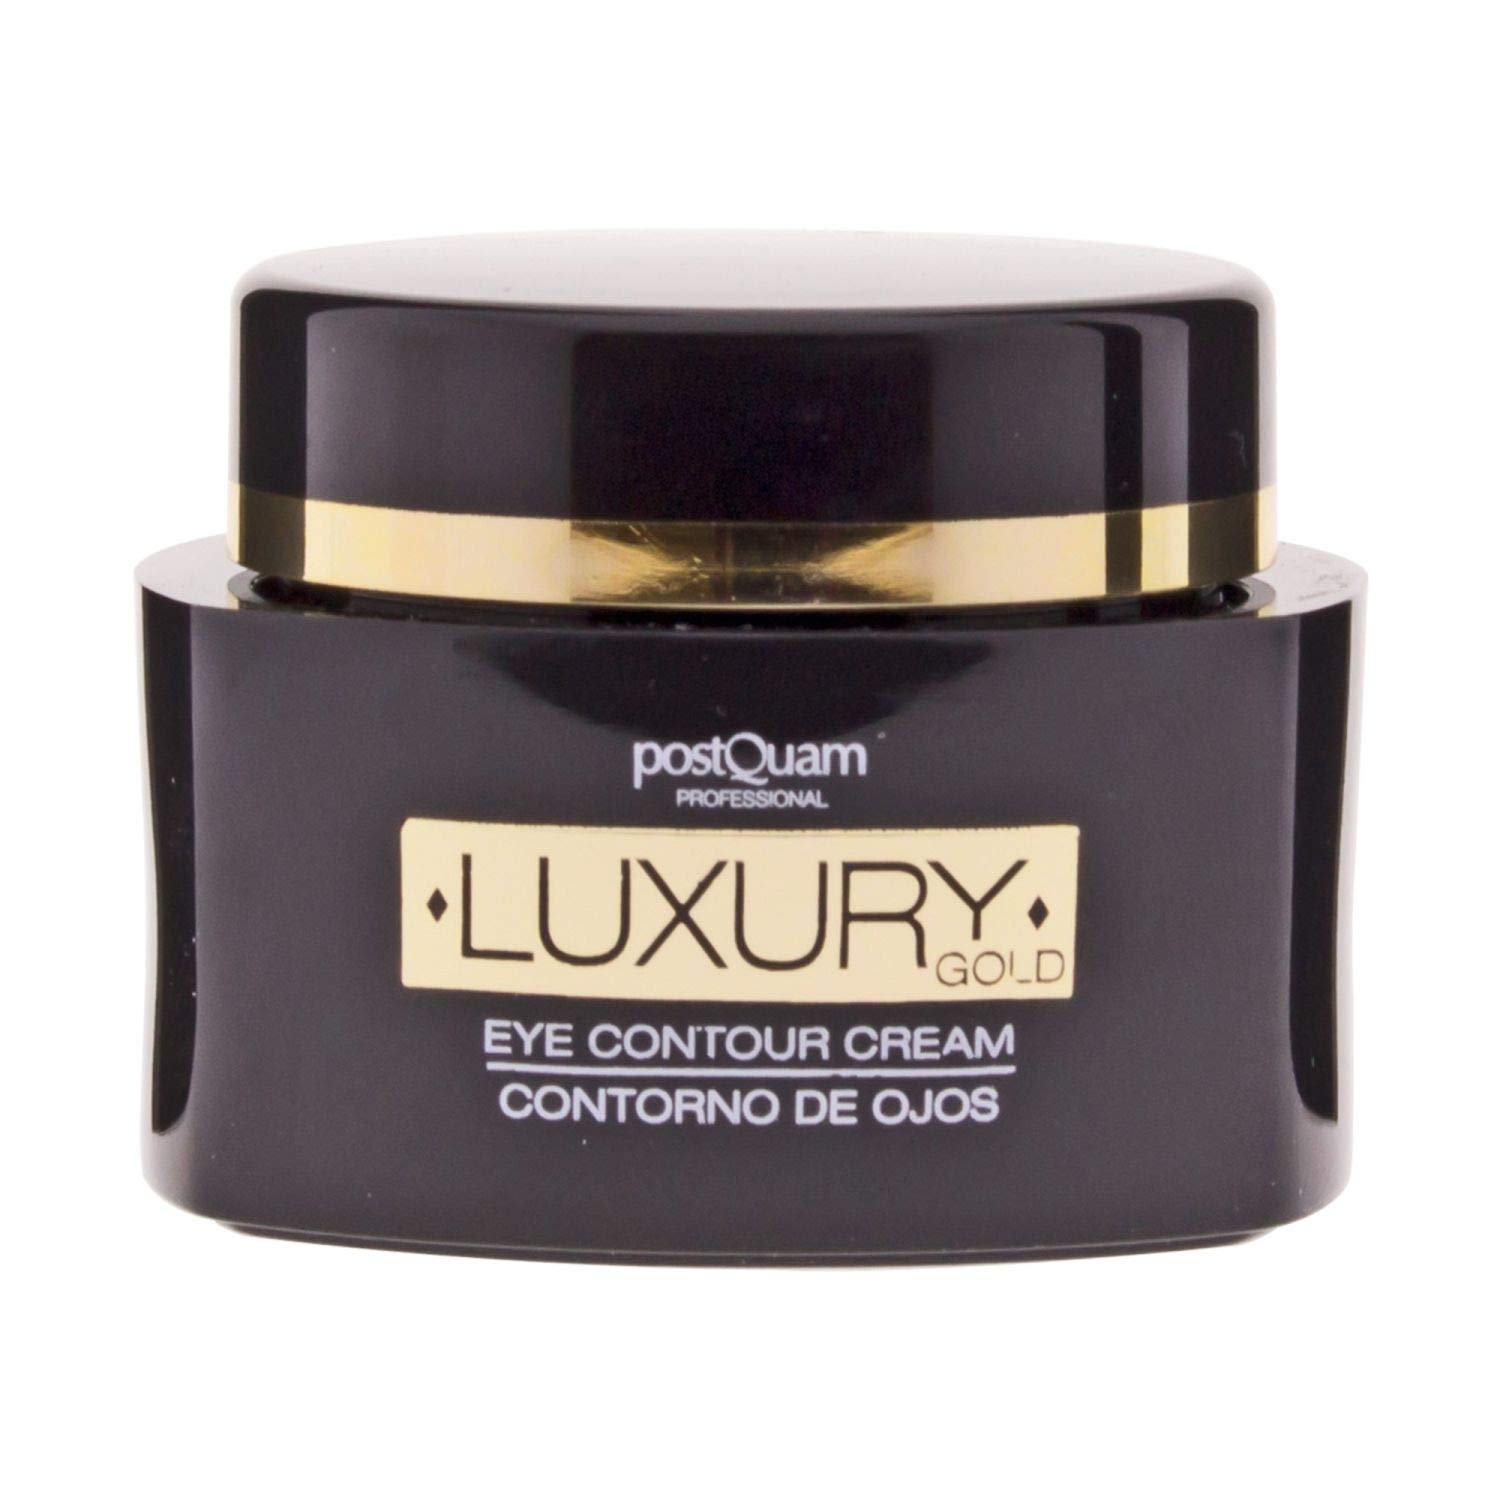 POSTQUAM Professional Luxury Gold Eye Contour Cream 15ml – Spanish Beauty - Hyaluronic Acid - Helps Minimize Wrinkles & Expression Lines - to Soothe the Eye Area - Active Ingredients